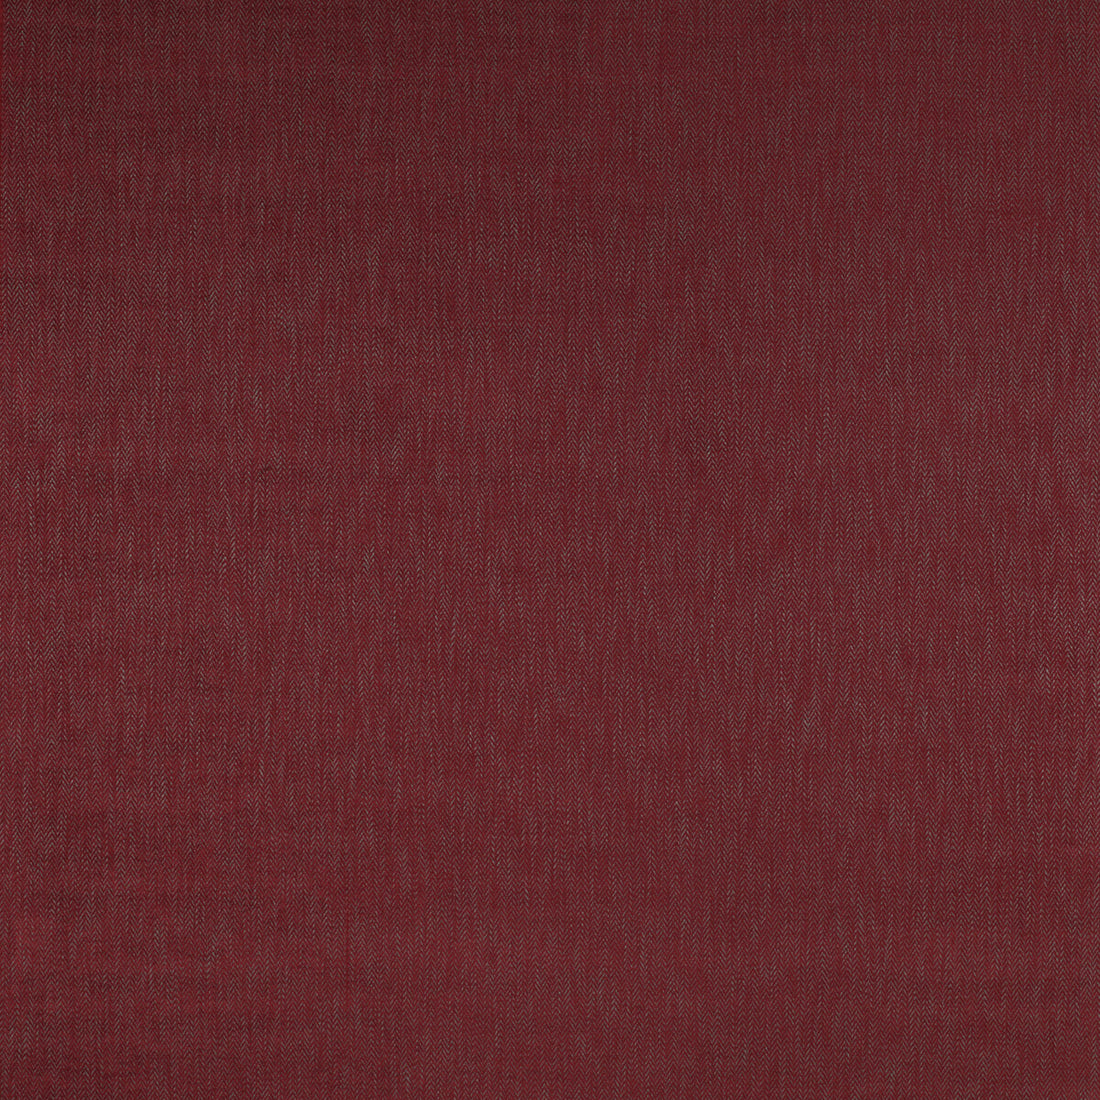 Alcala fabric in rojo color - pattern GDT5201.003.0 - by Gaston y Daniela in the Madrid collection